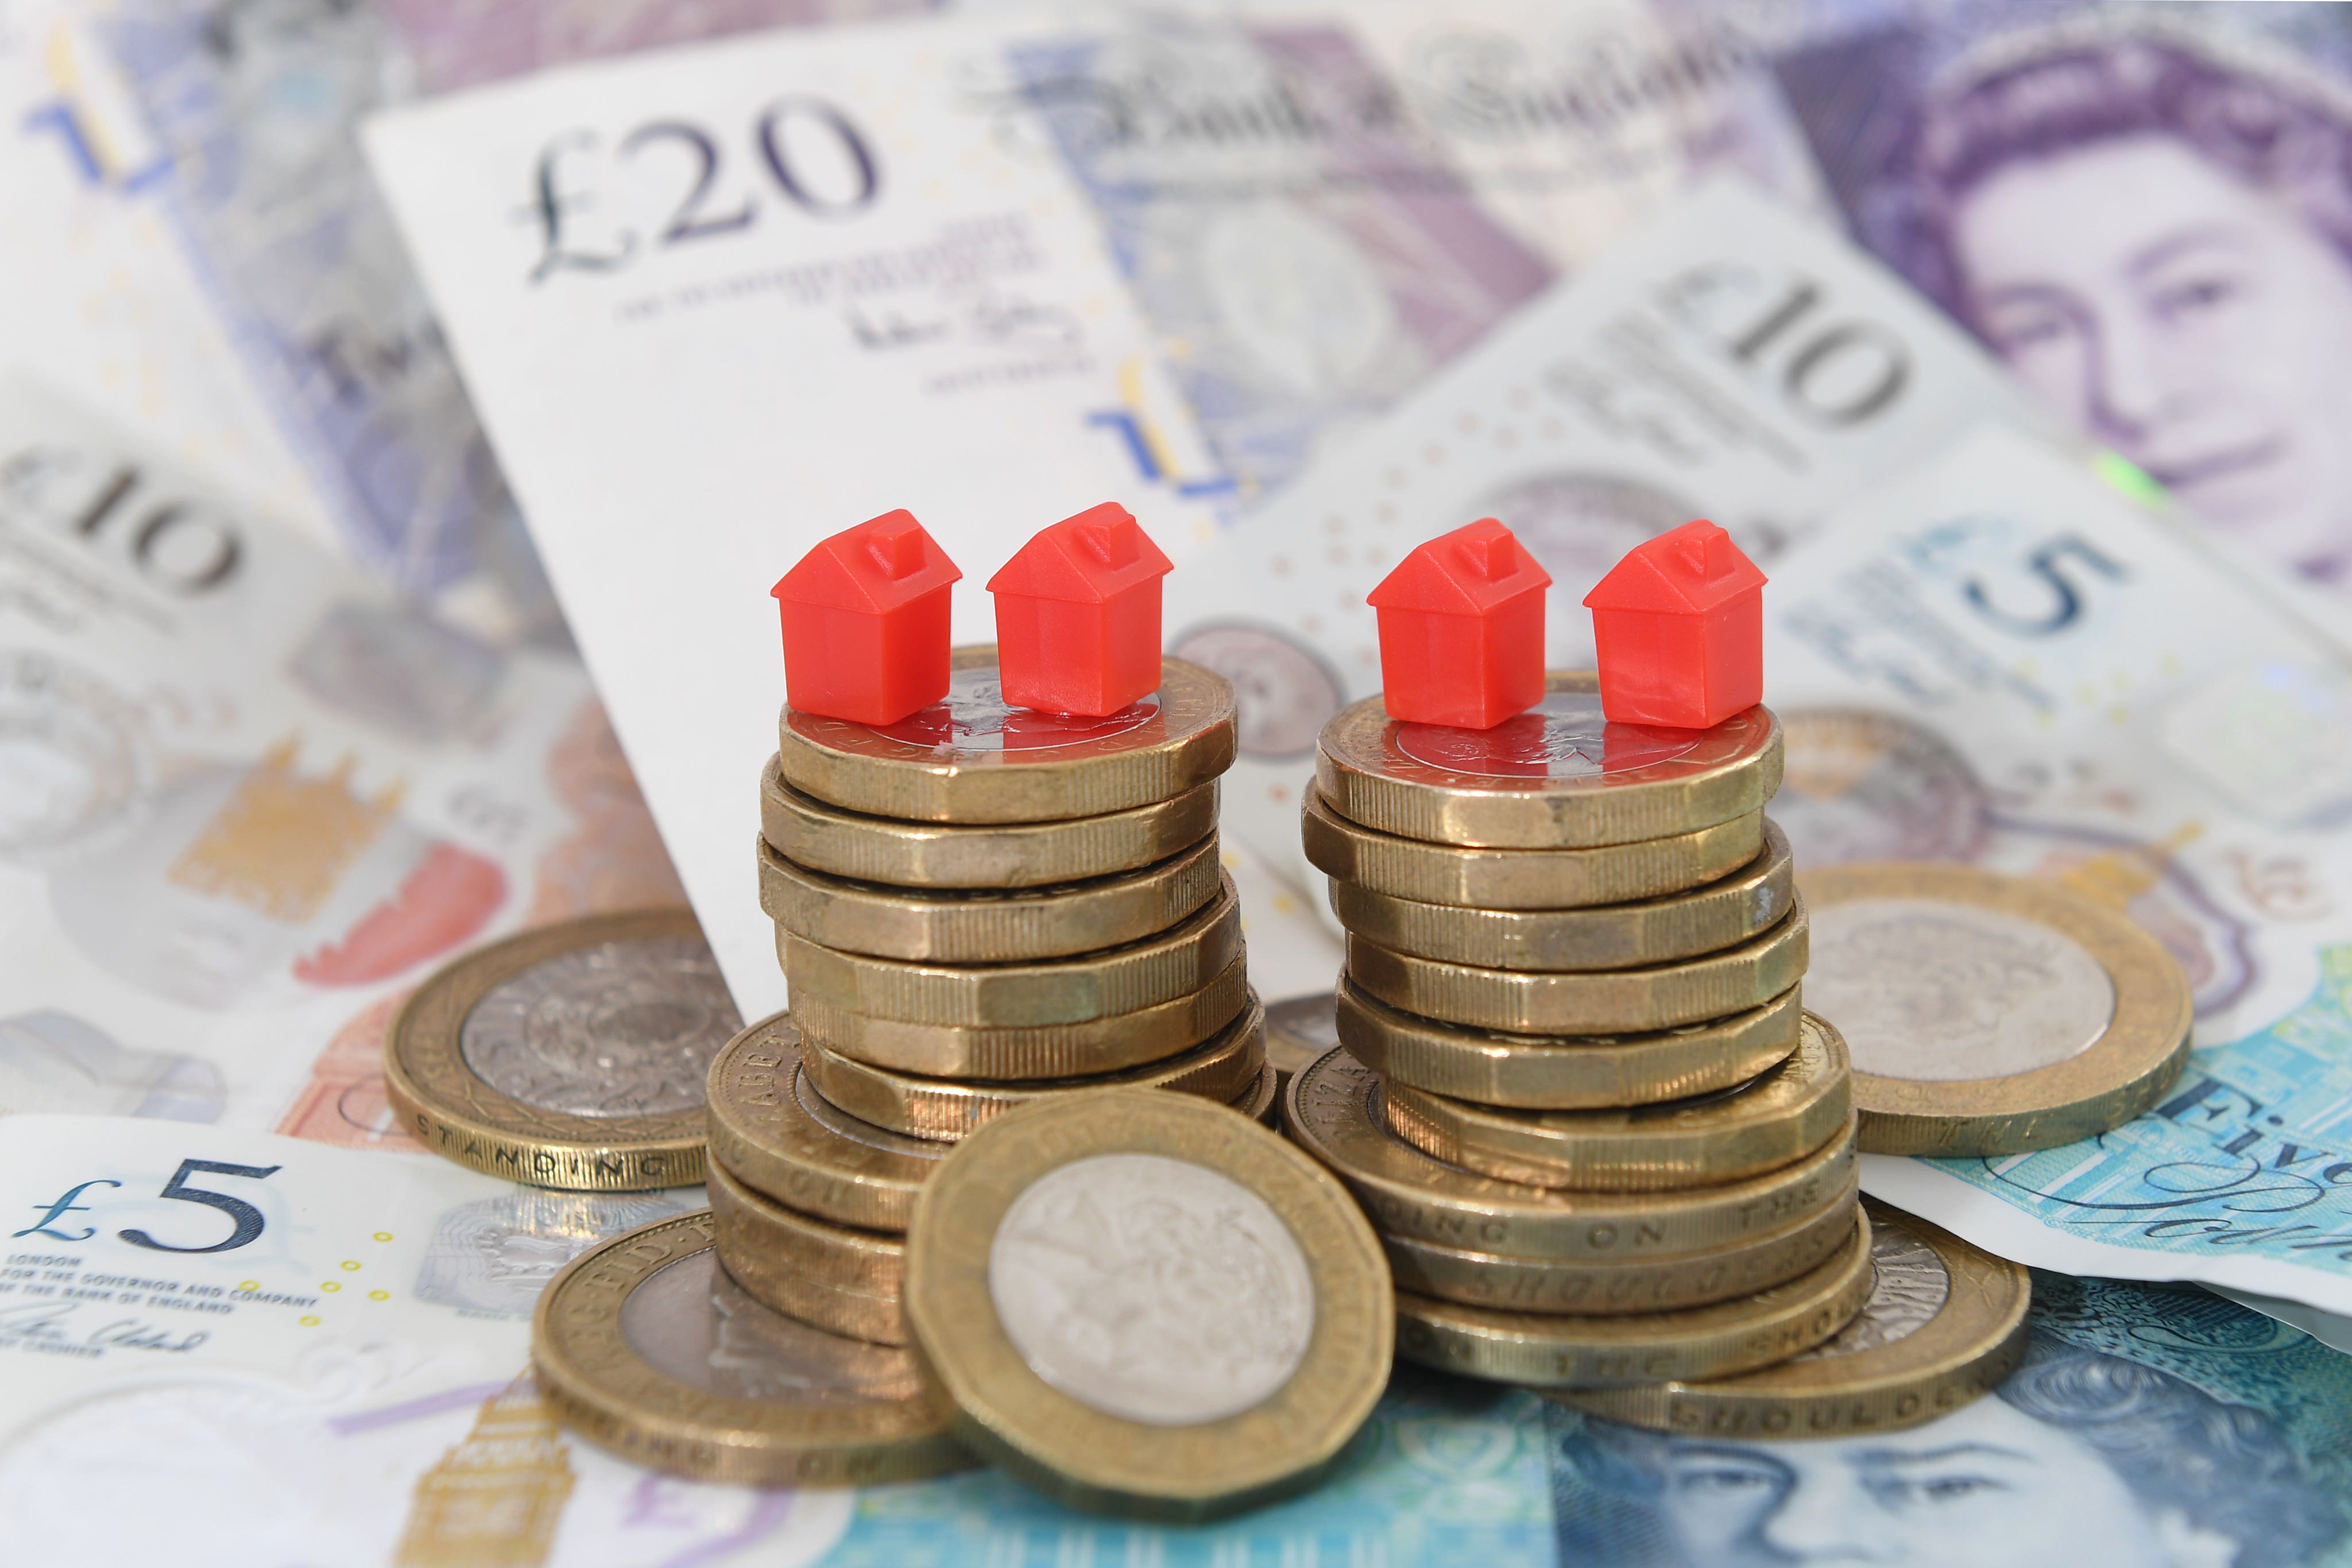 The average first-time buyer needs a household income of more than £60,000 to get onto the property ladder, according to Zoopla (Joe Giddens/PA)